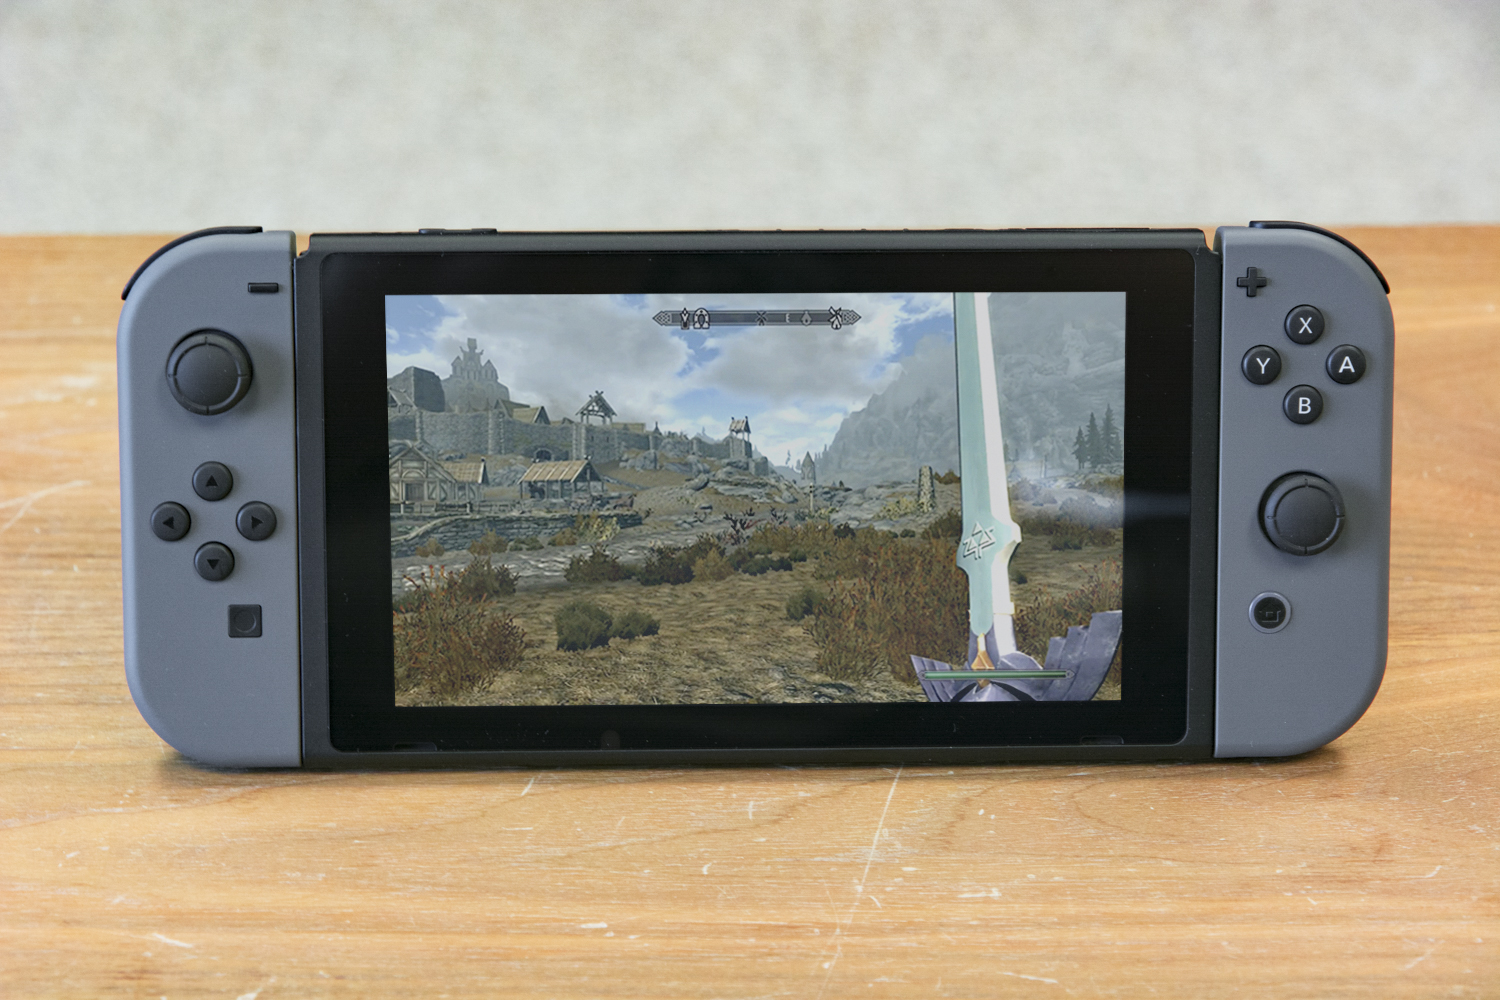 Nintendo Switch 2 could be a true powerhouse with this